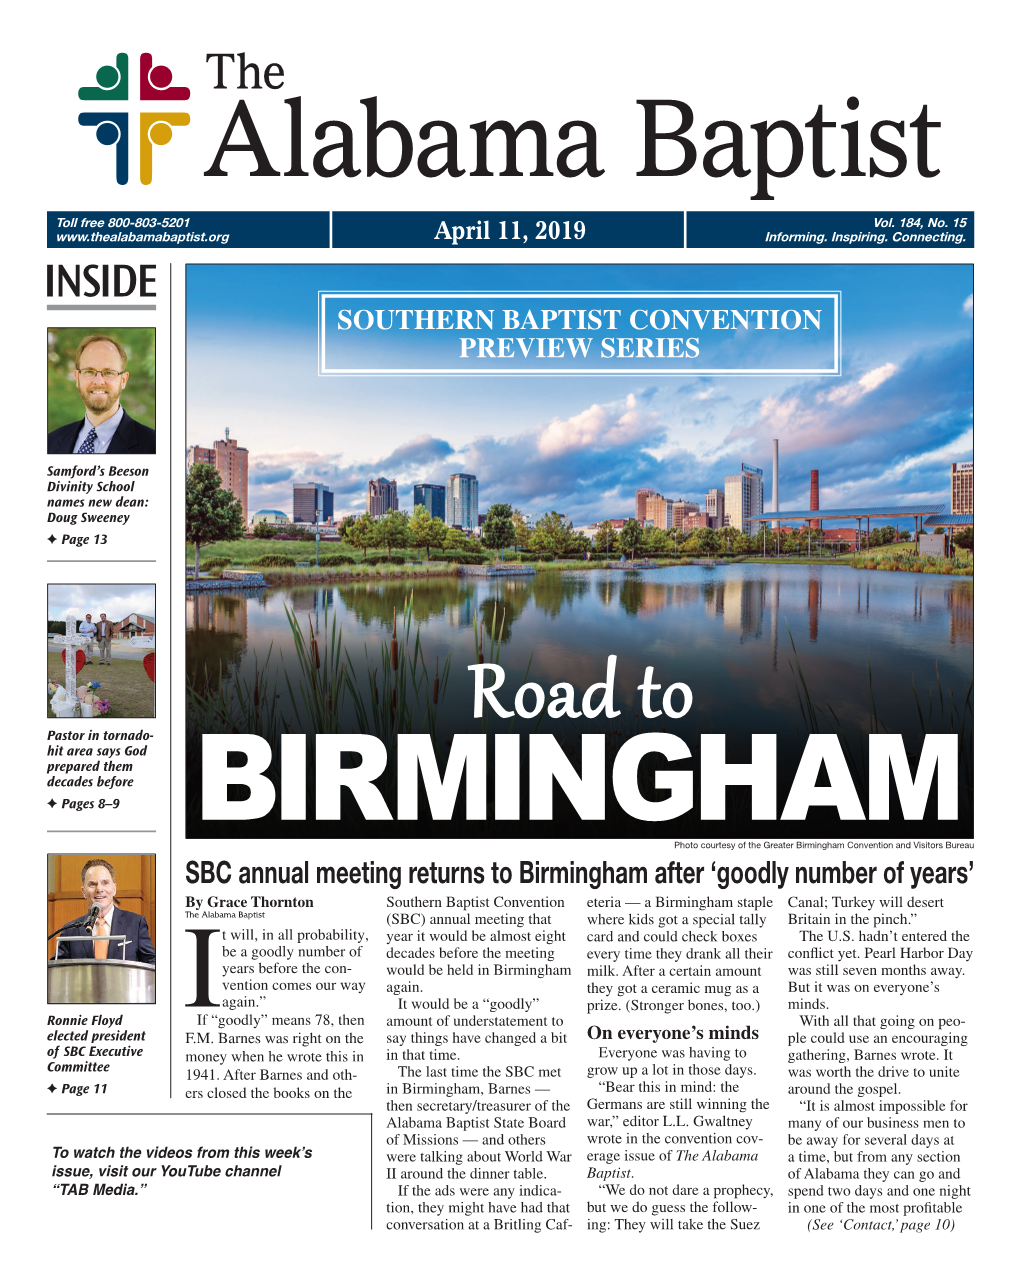 Inside Southern Baptist Convention Preview Series